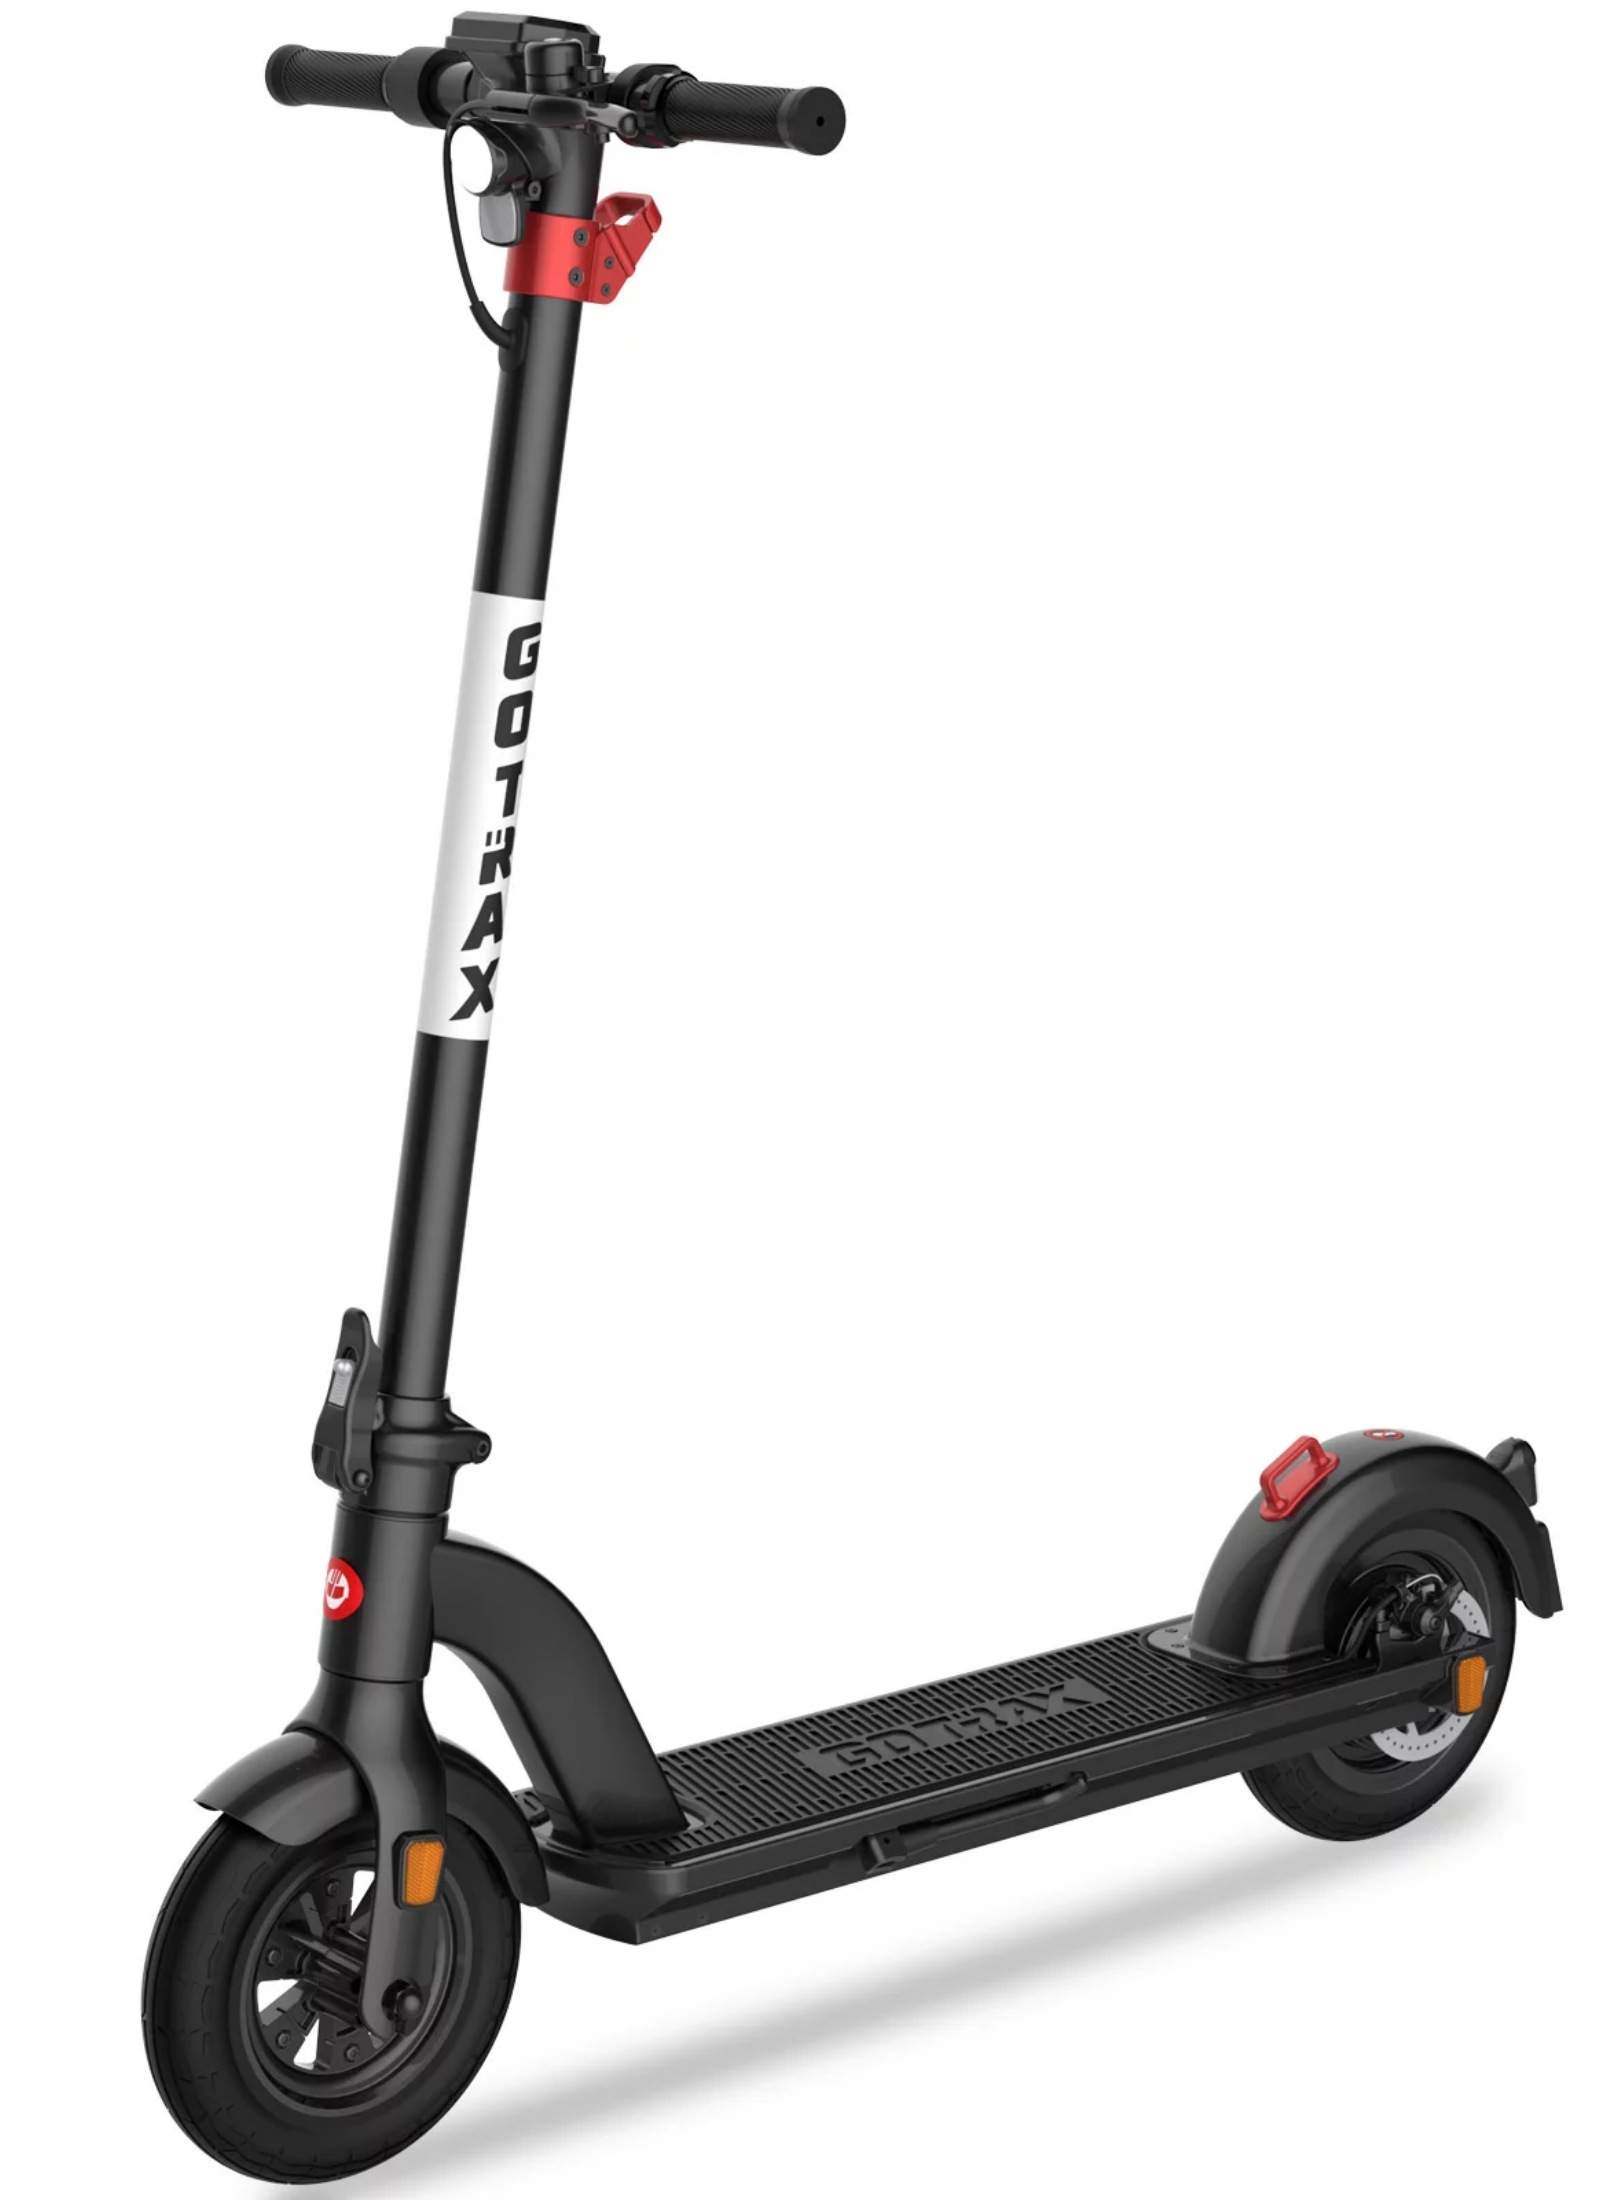 GOTRAX G3 Electric Scooter, 8.5" Pneumatic Tires, Max 18mile Range and 15.5Mph Power by 350W Motor, Foldable Escooter for Adult Unisex,Black - image 1 of 9